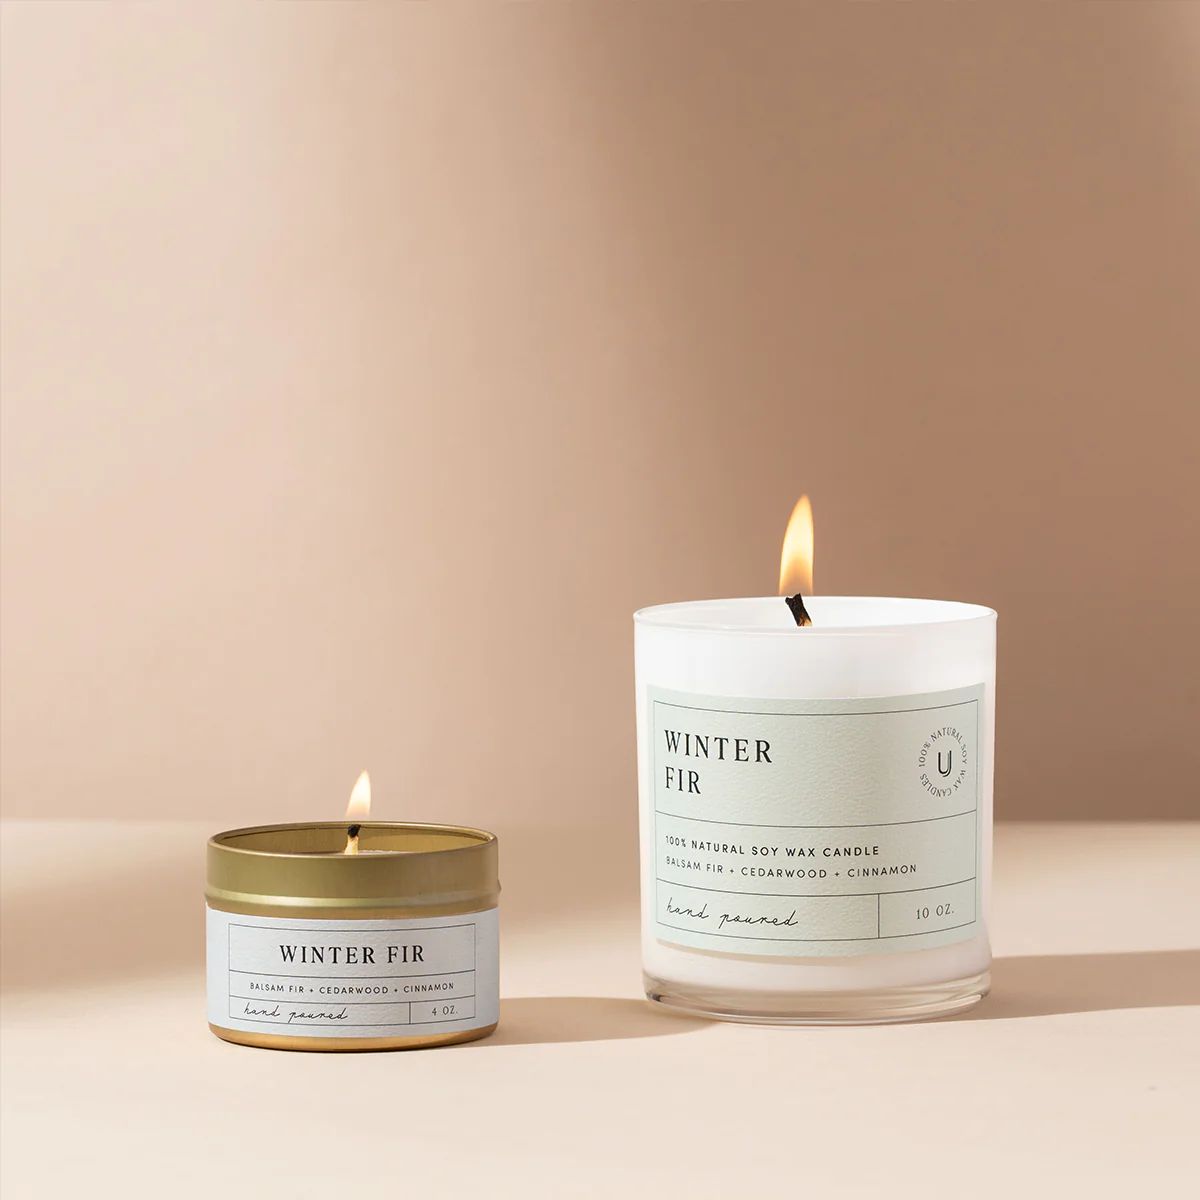 Winter Fir Candle | Uncommon James